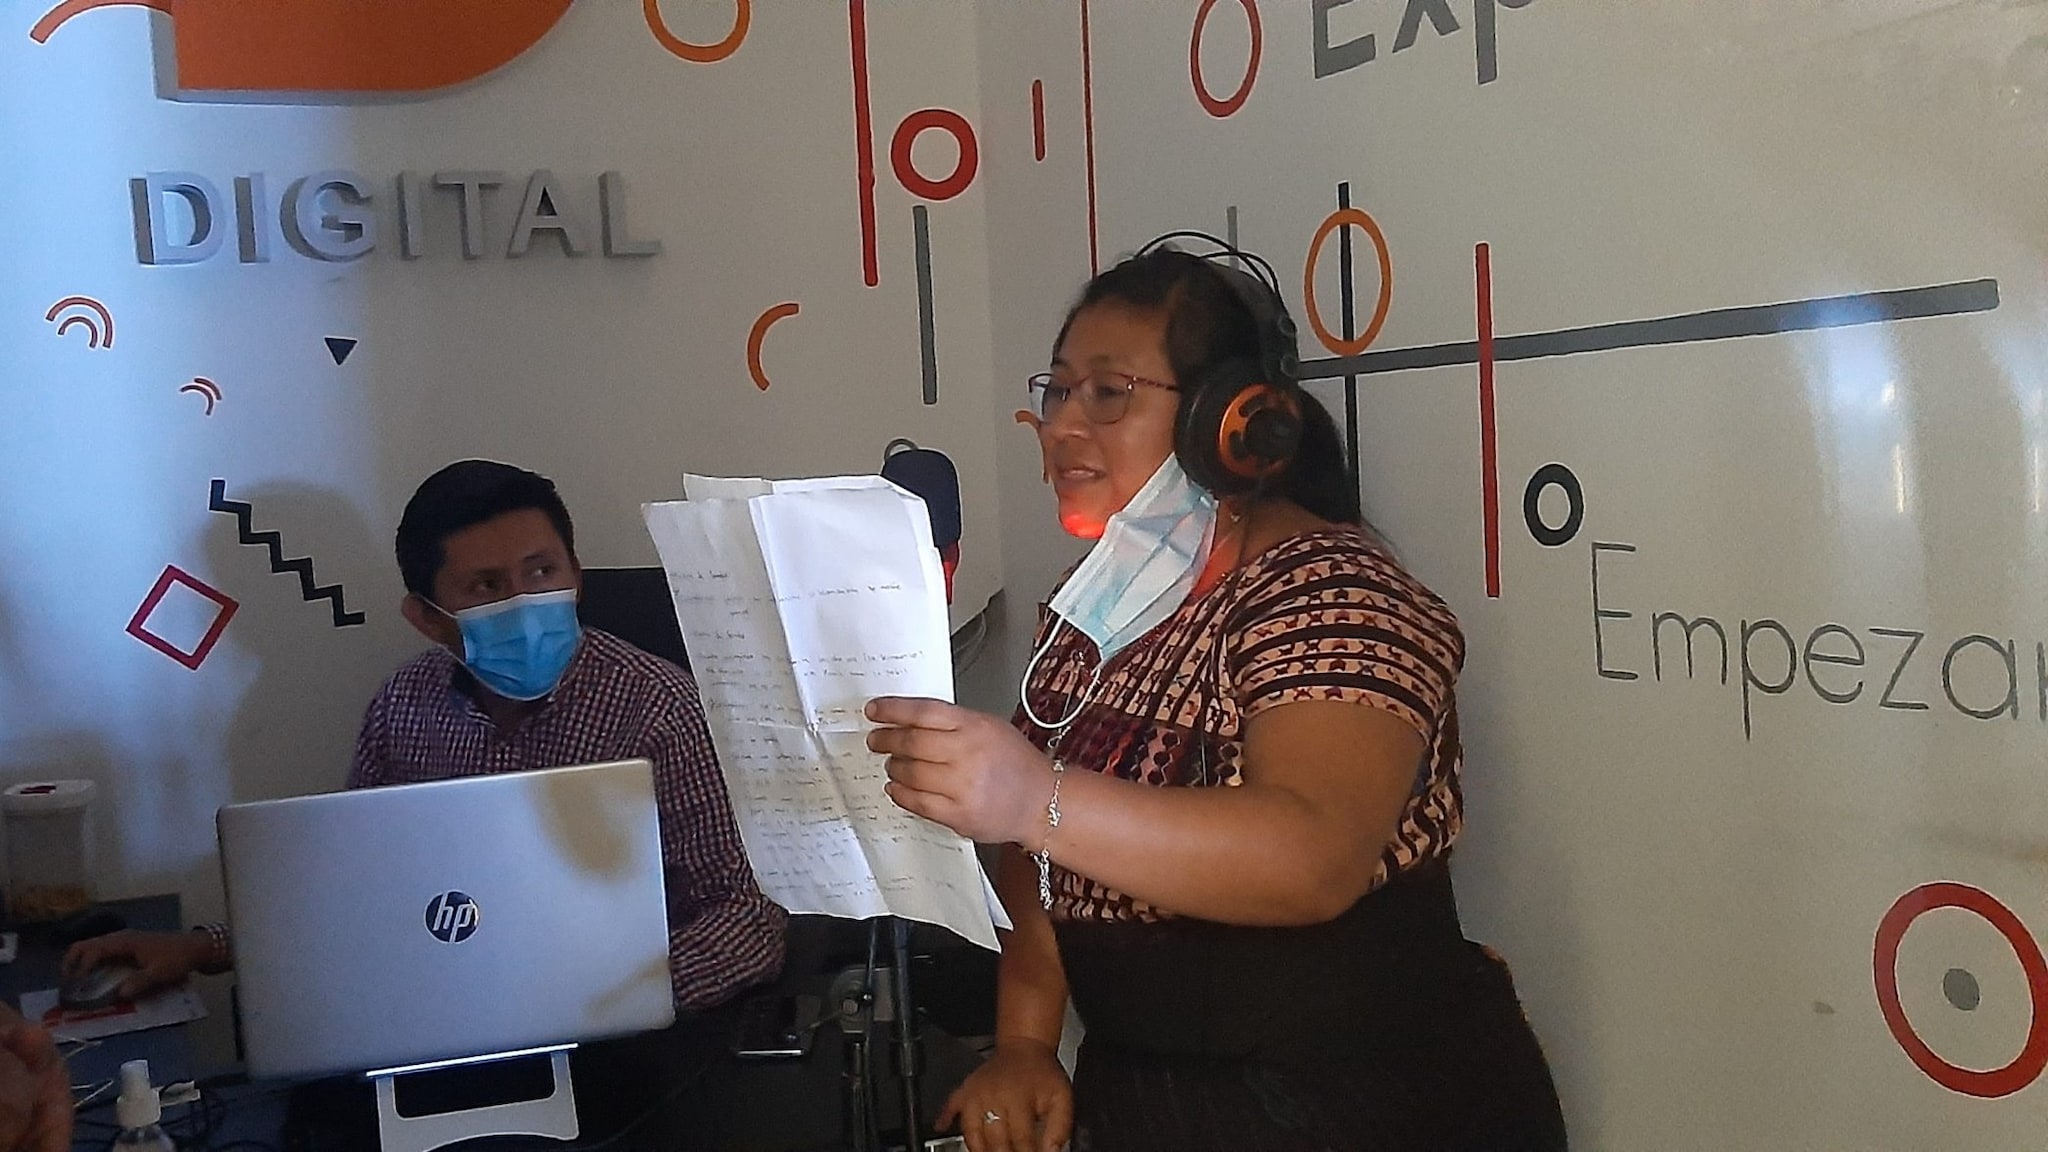 A woman is seen reading from a paper and speaking into a microphone to record a segment that will air on a local radio station.